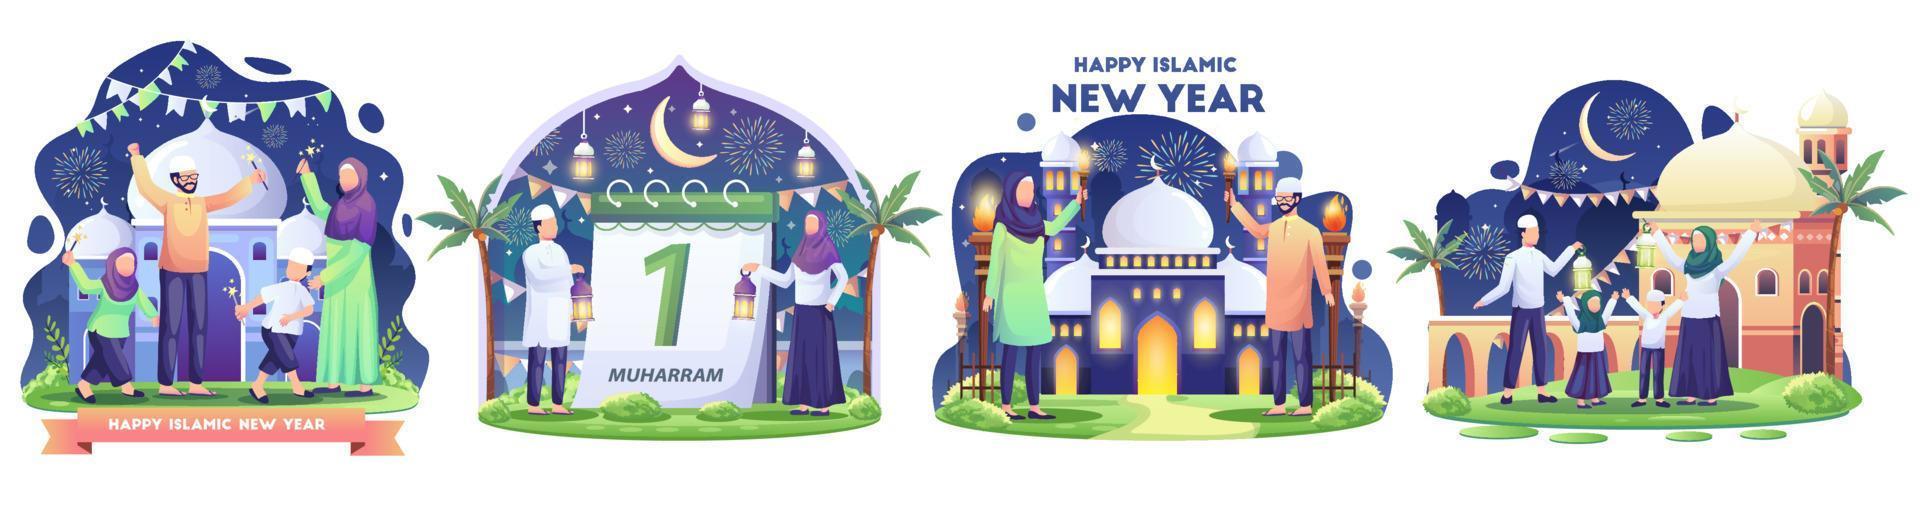 Set of Muslim family celebrating Islamic new year with torches festival. Flat style vector illustration